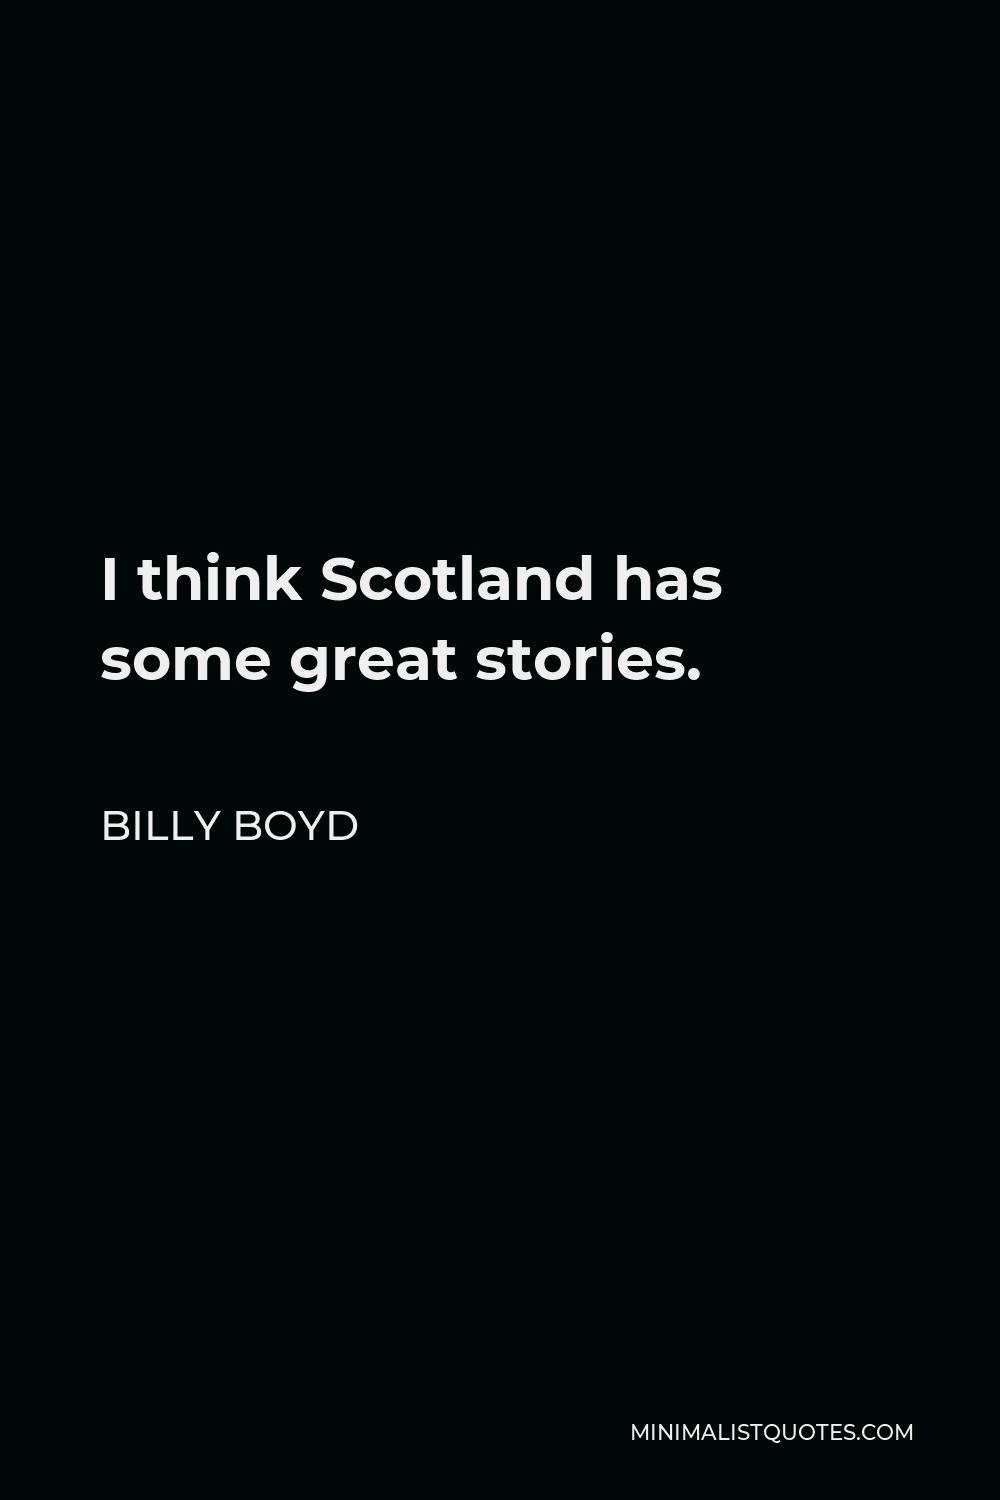 Billy Boyd Quote - I think Scotland has some great stories.